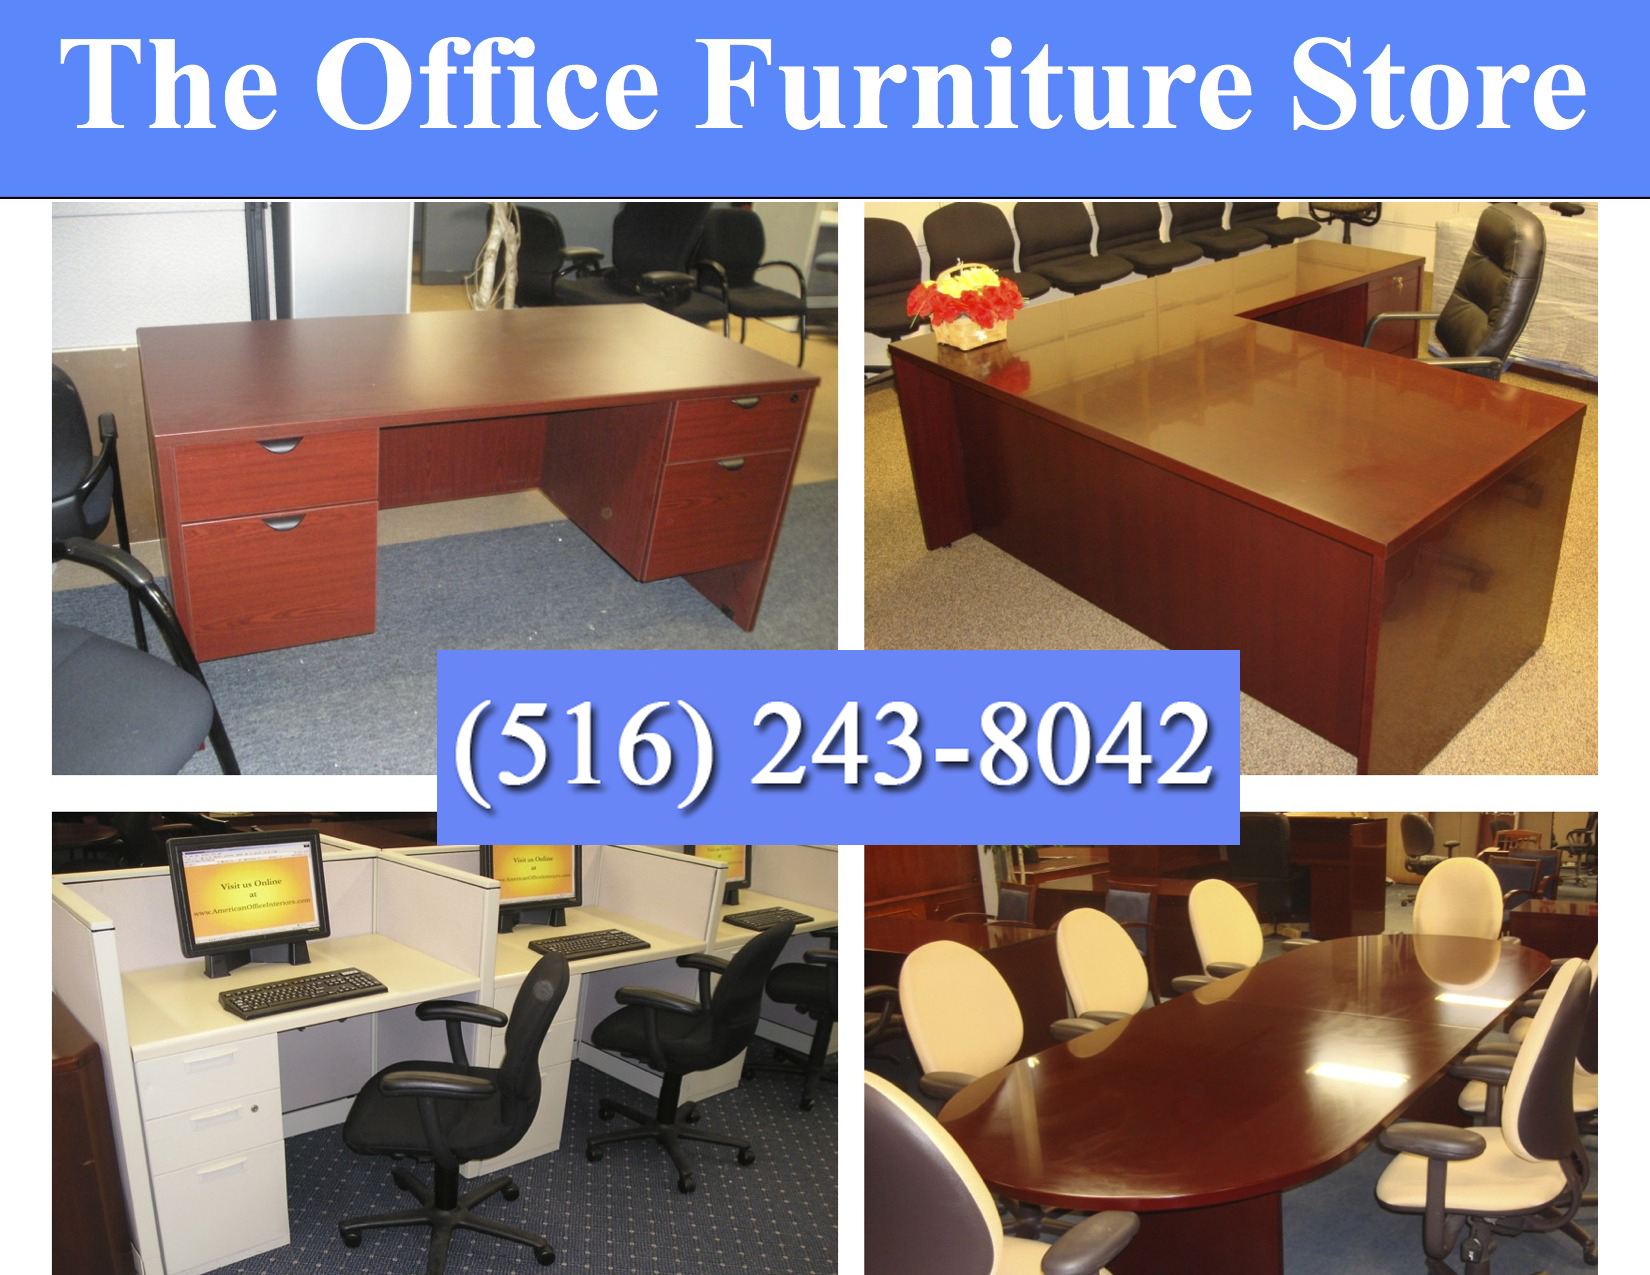 Office Furniture That Is Used For Sale The Office Furniture